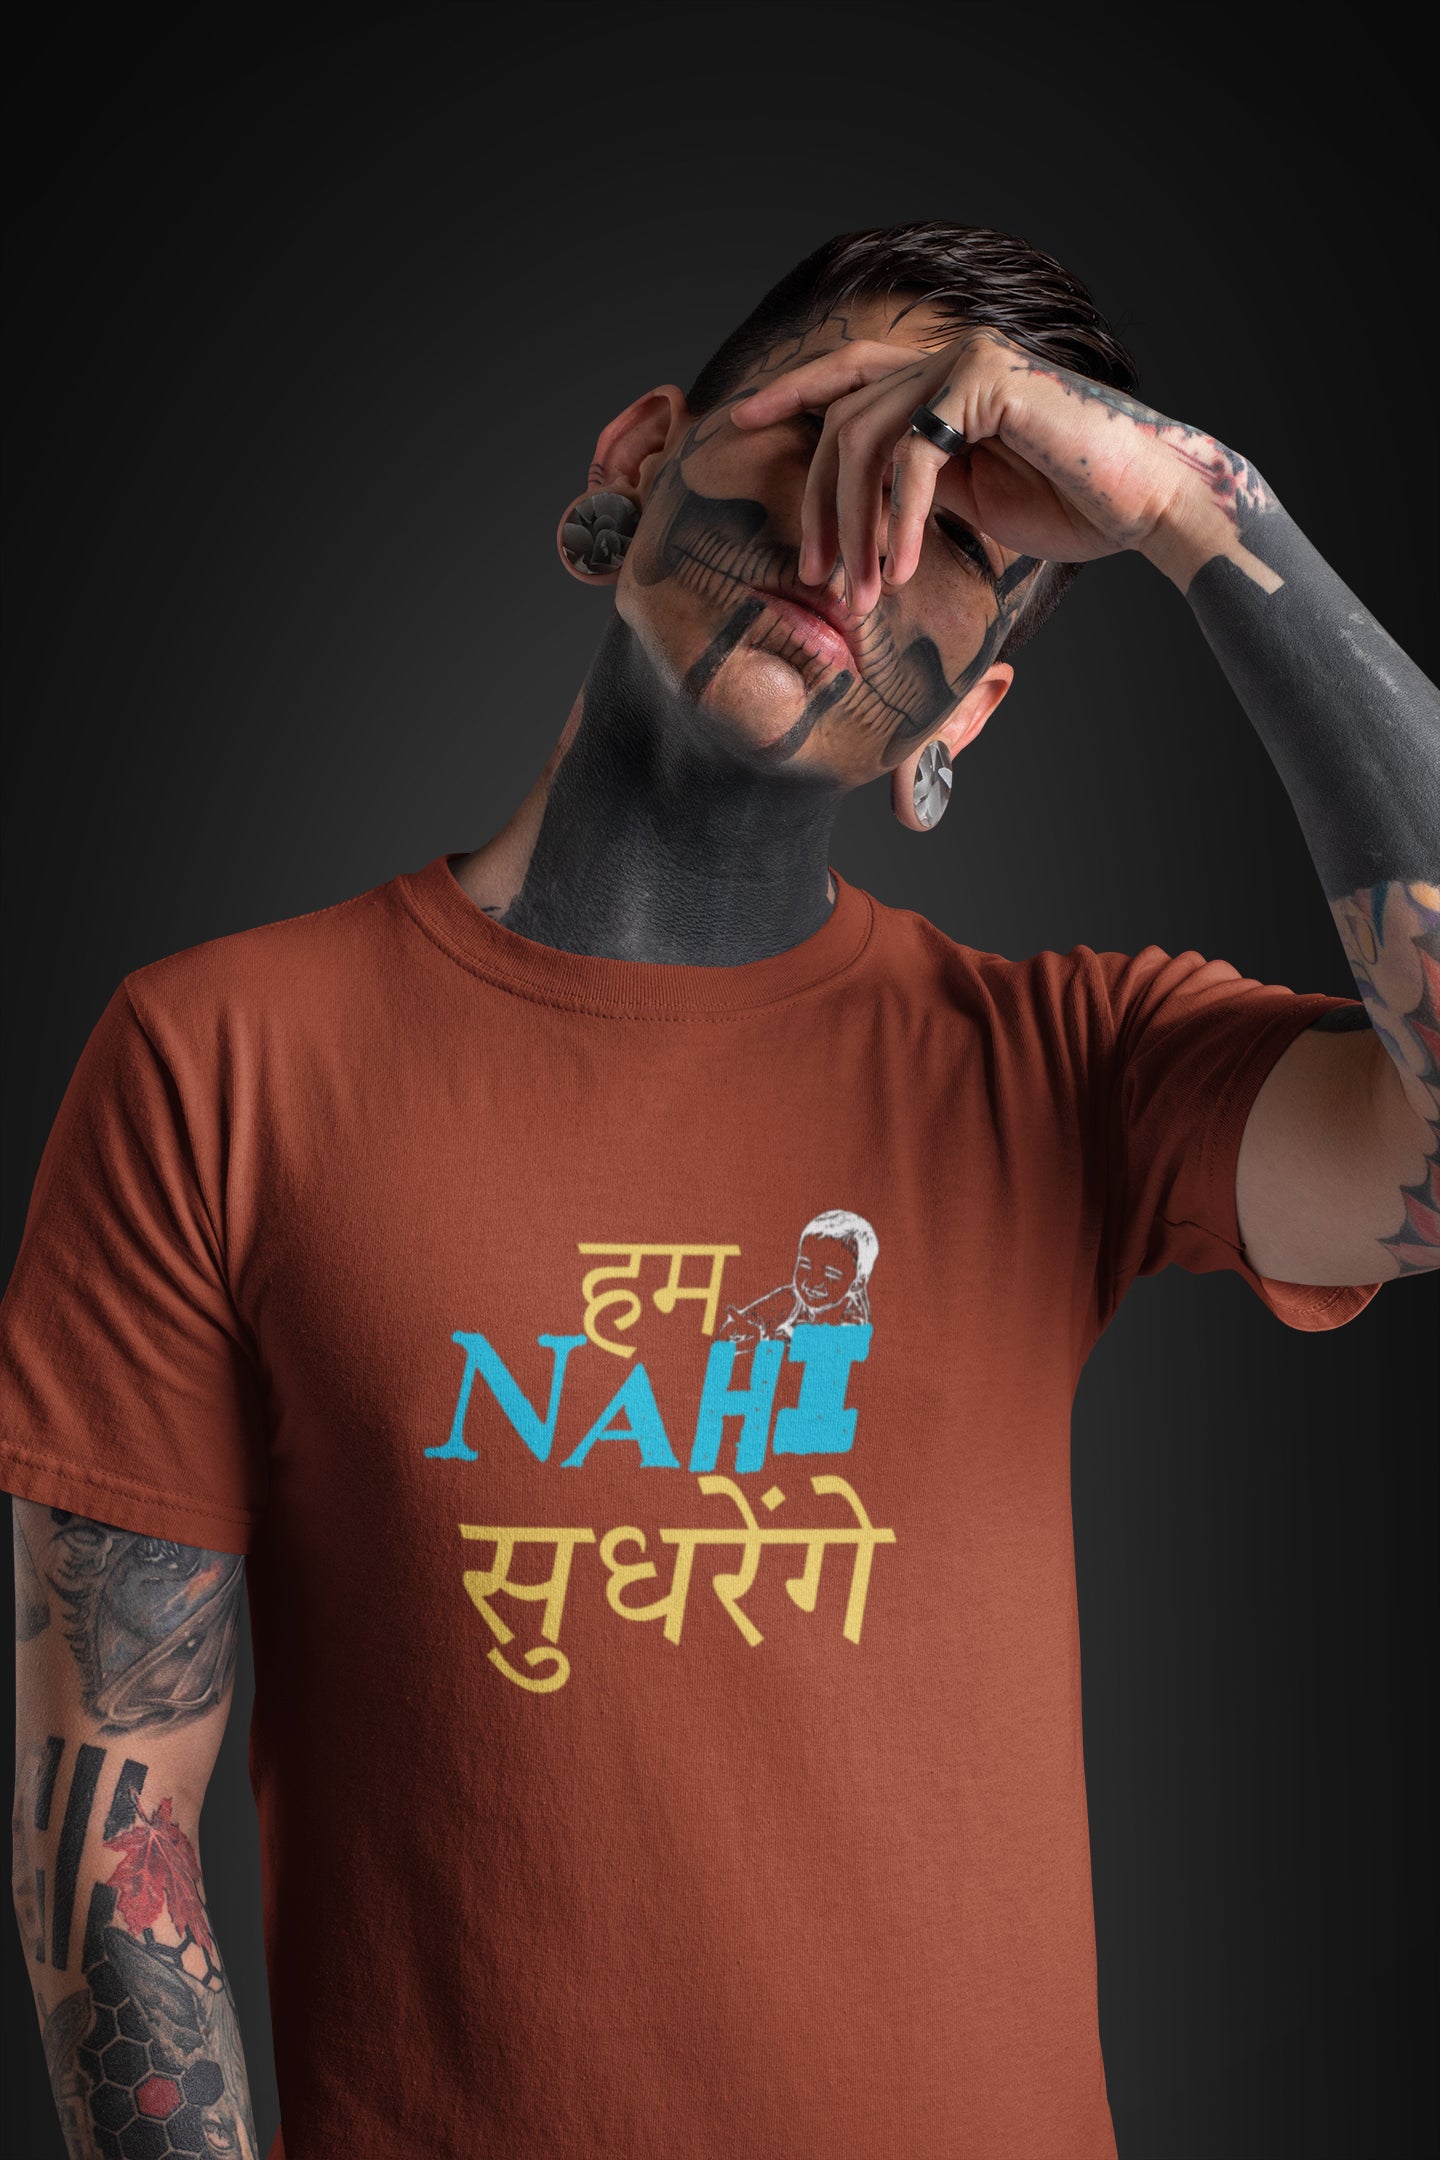 Nahi Posters for Sale  Redbubble